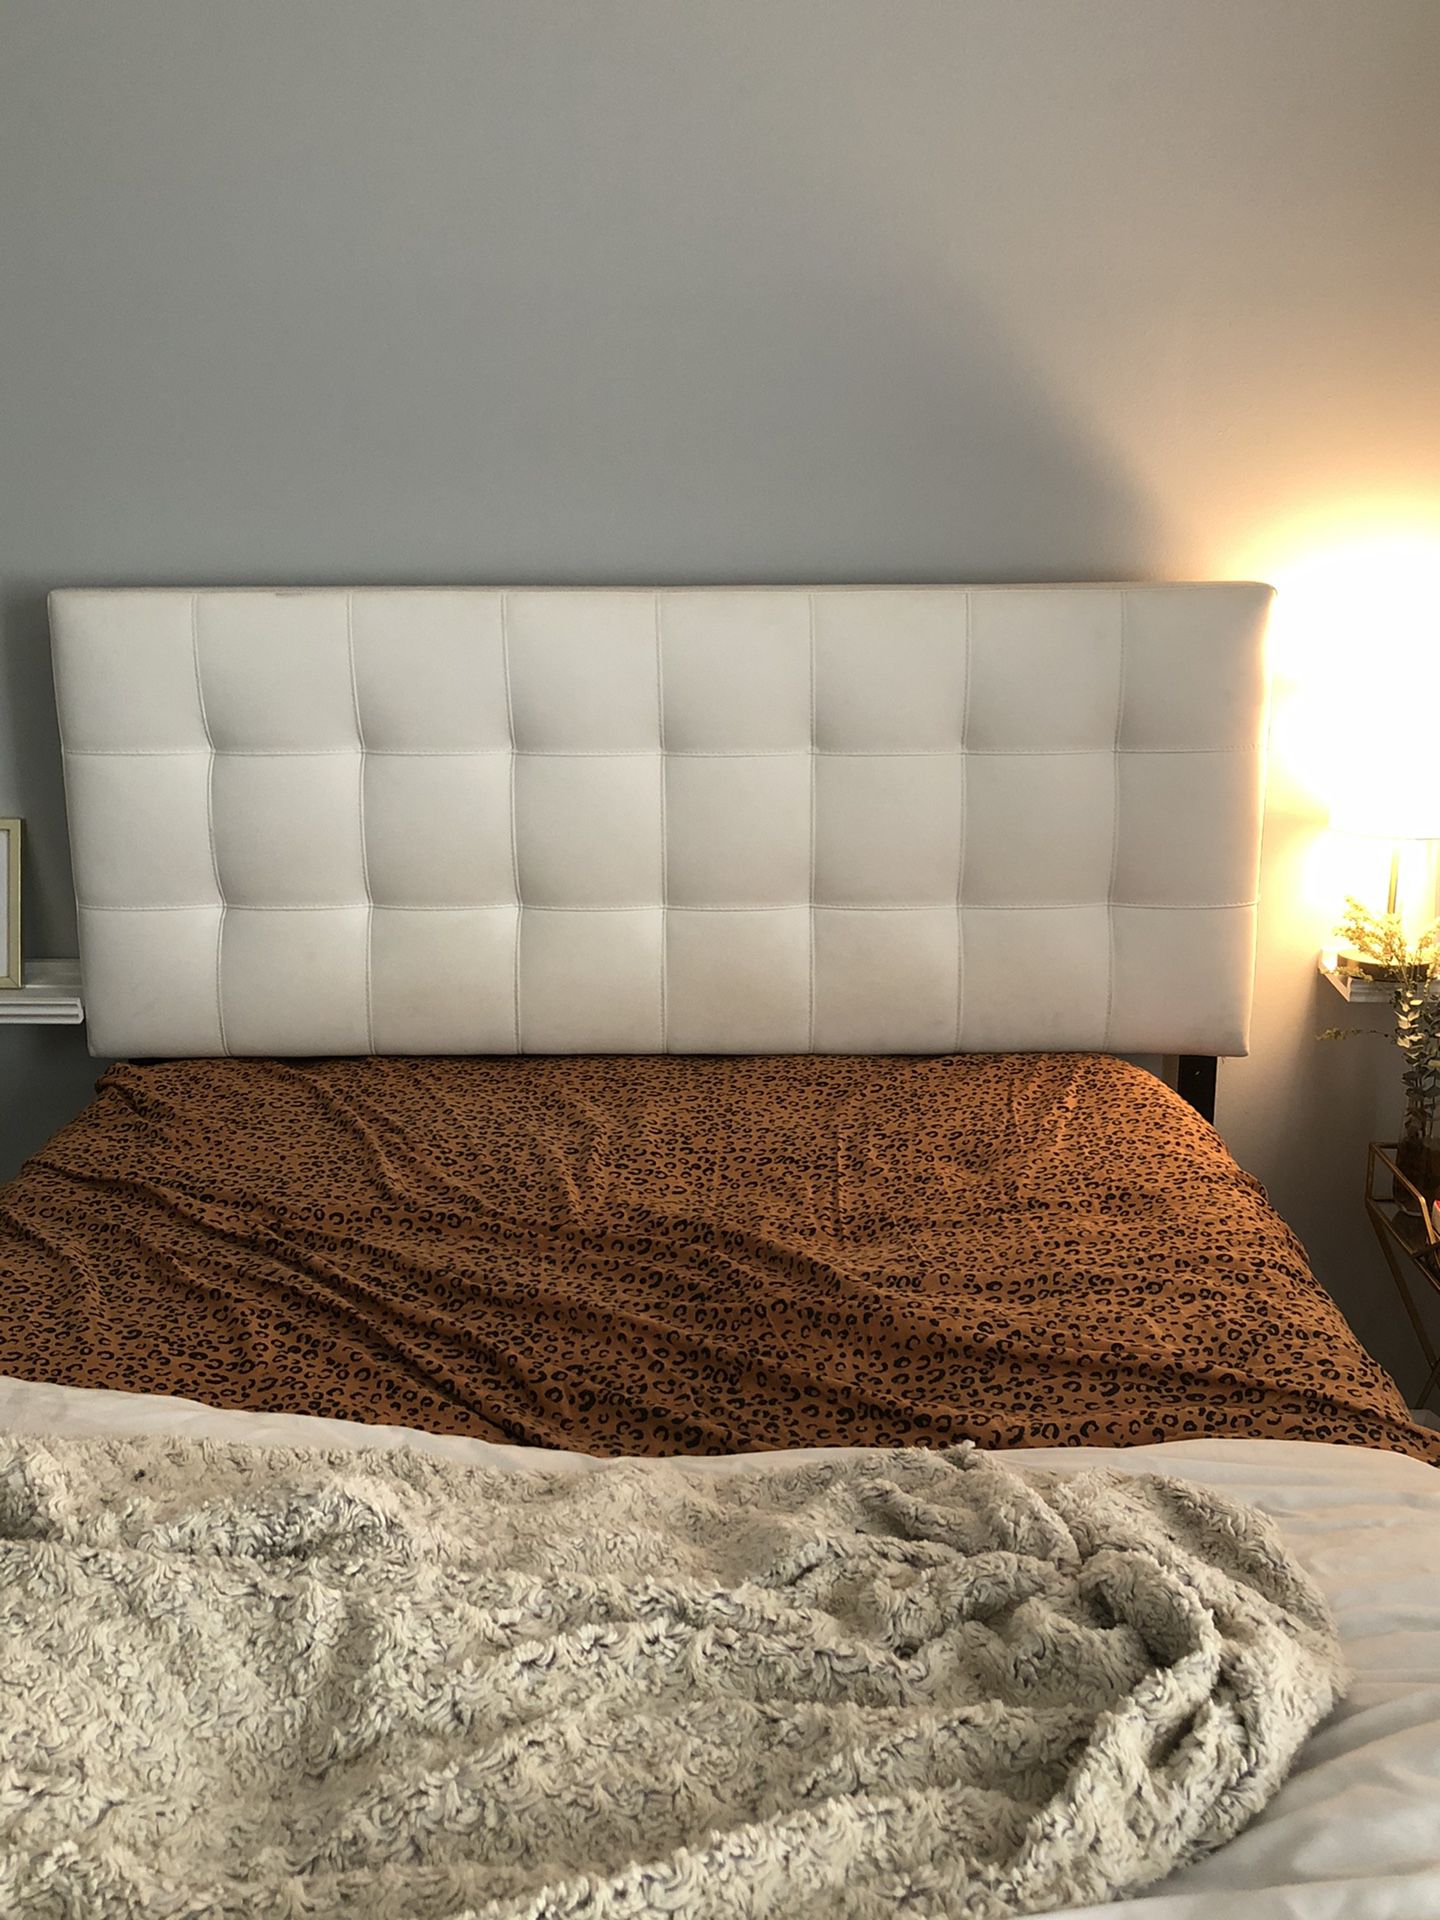 Full Pillow top Mattress - very nice and comfortable -used